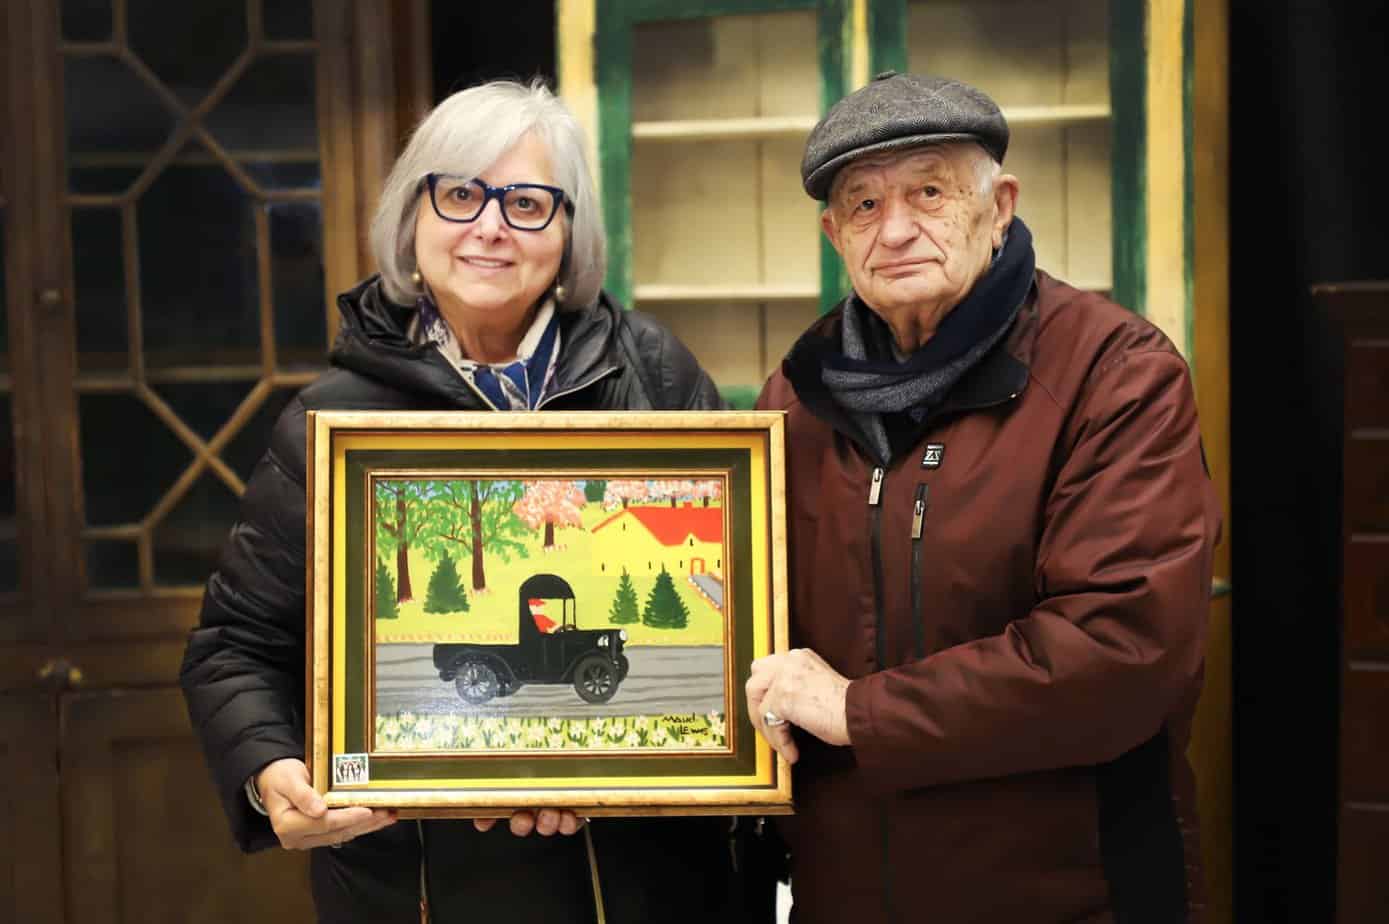 Irene Demas and Tony Demas holding a Maud Lewis painting of a black truck